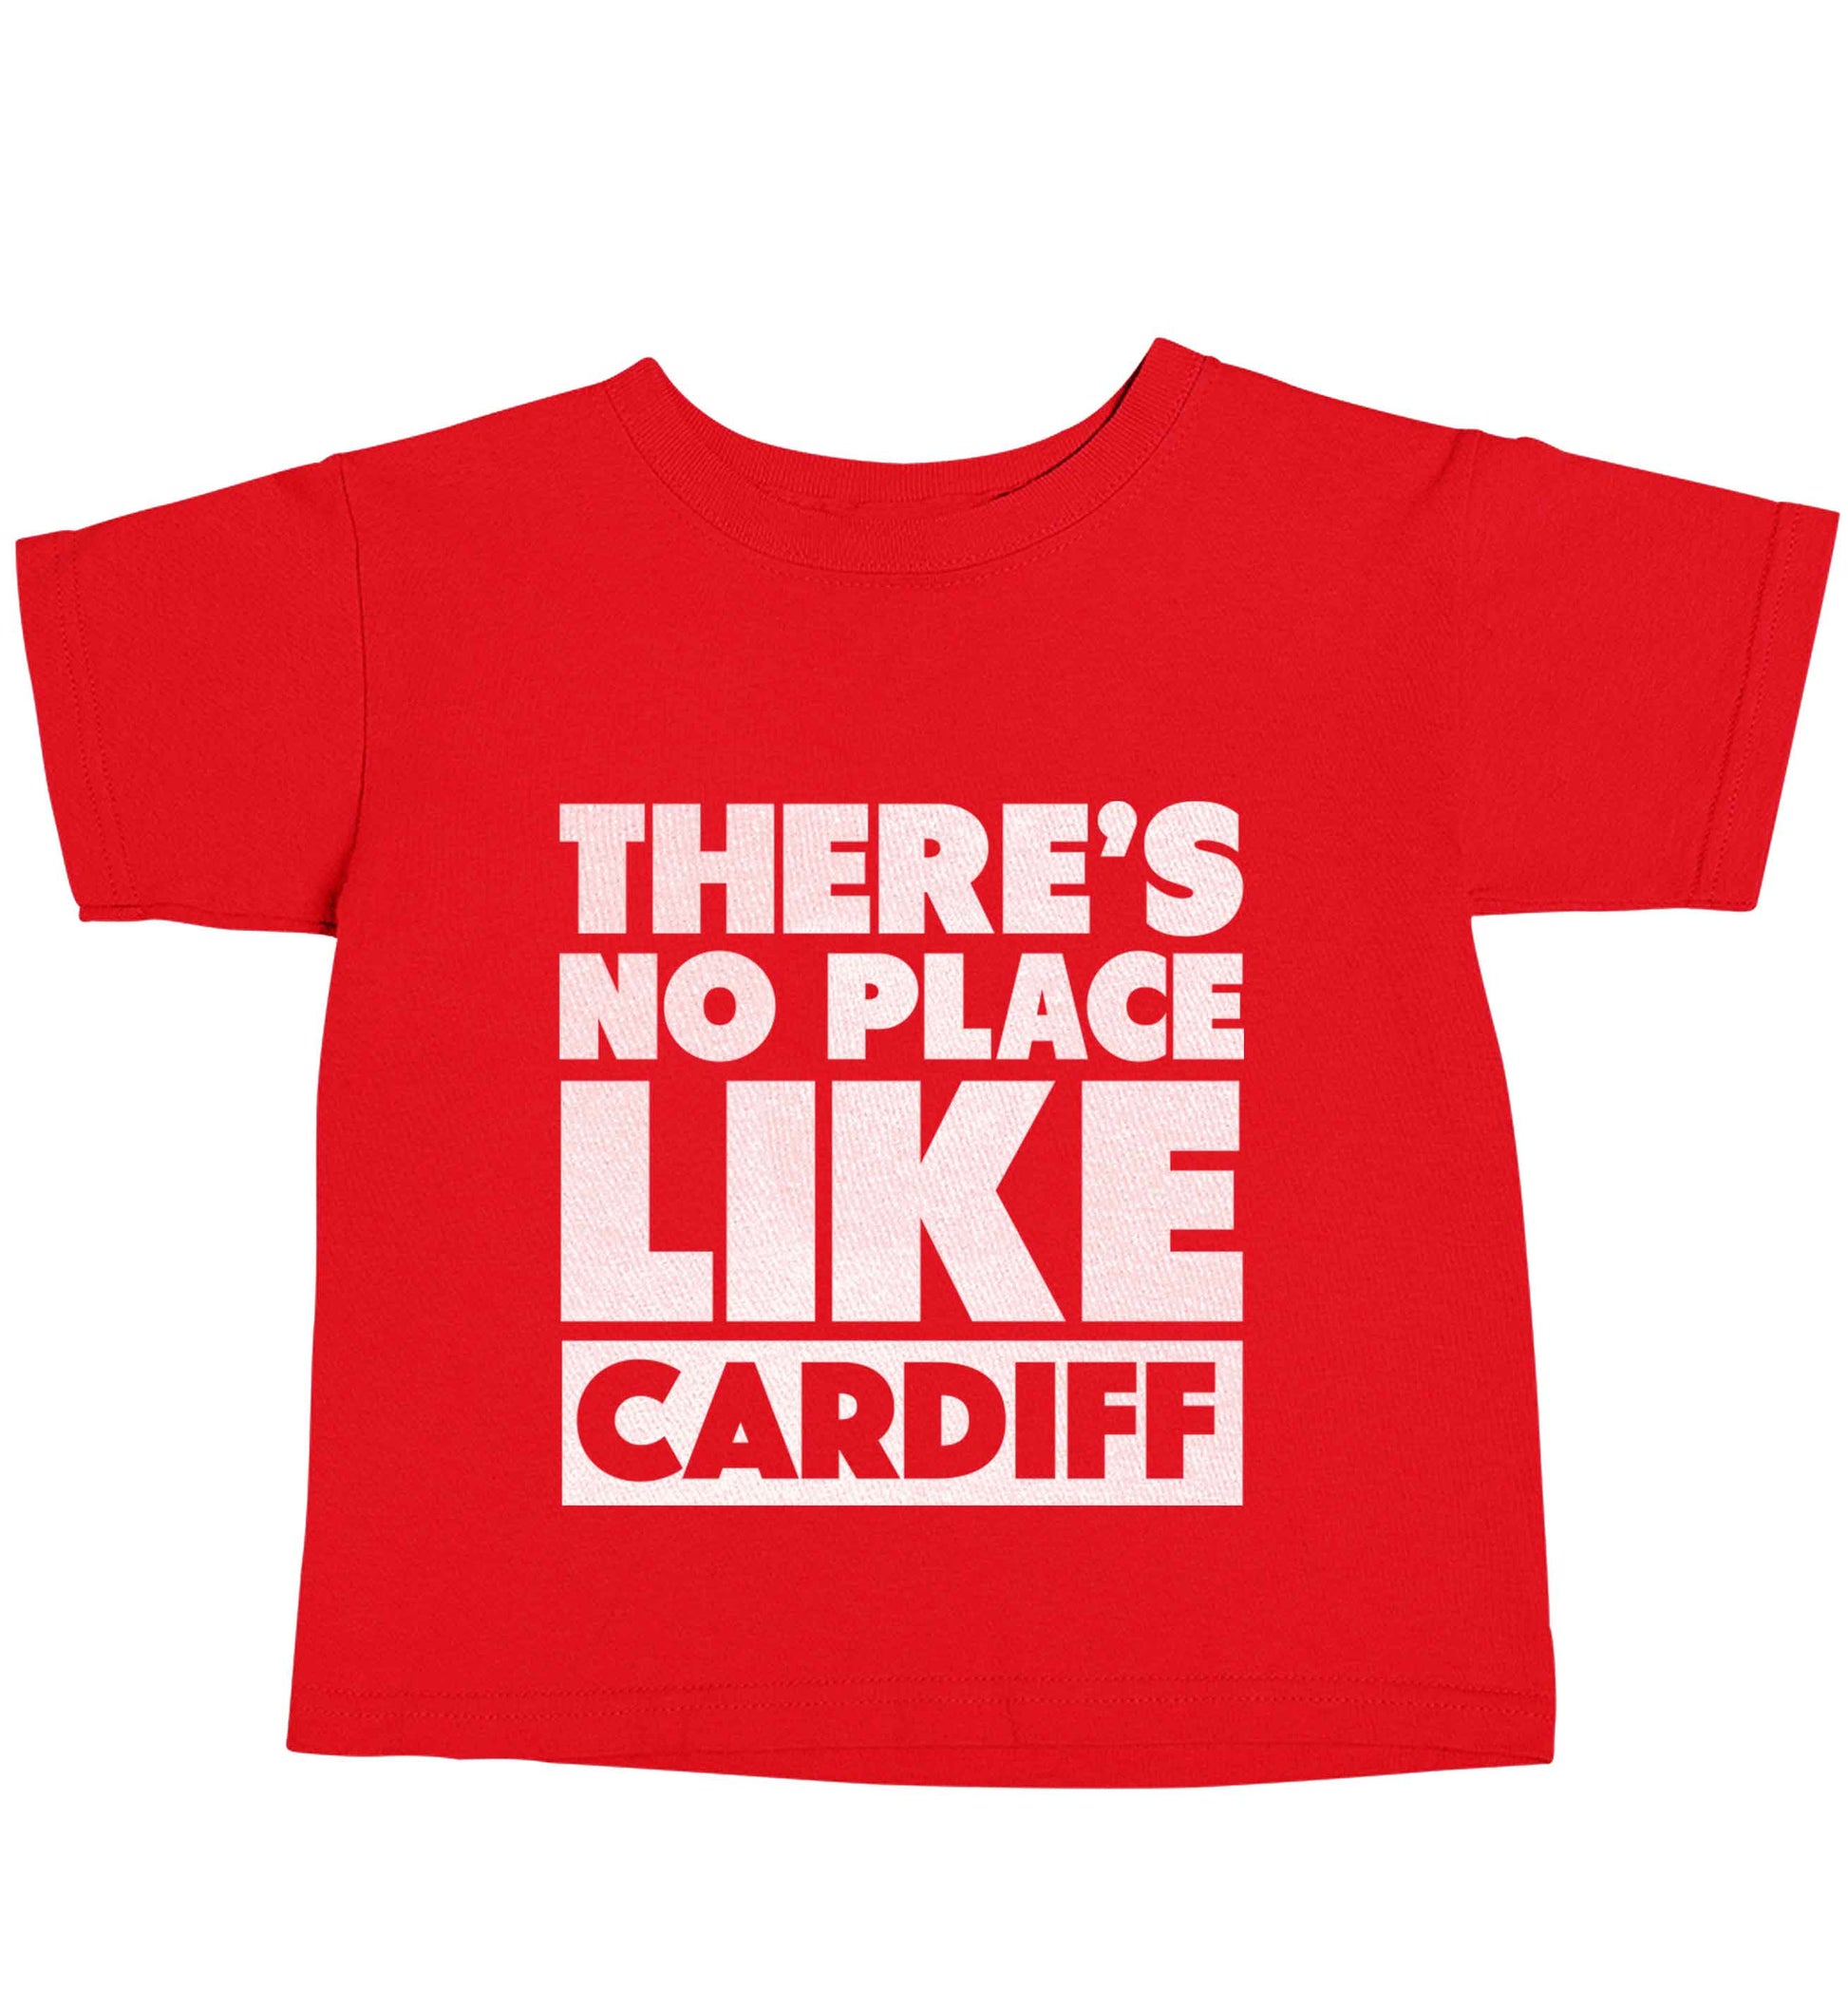 There's no place like Cardiff red baby toddler Tshirt 2 Years